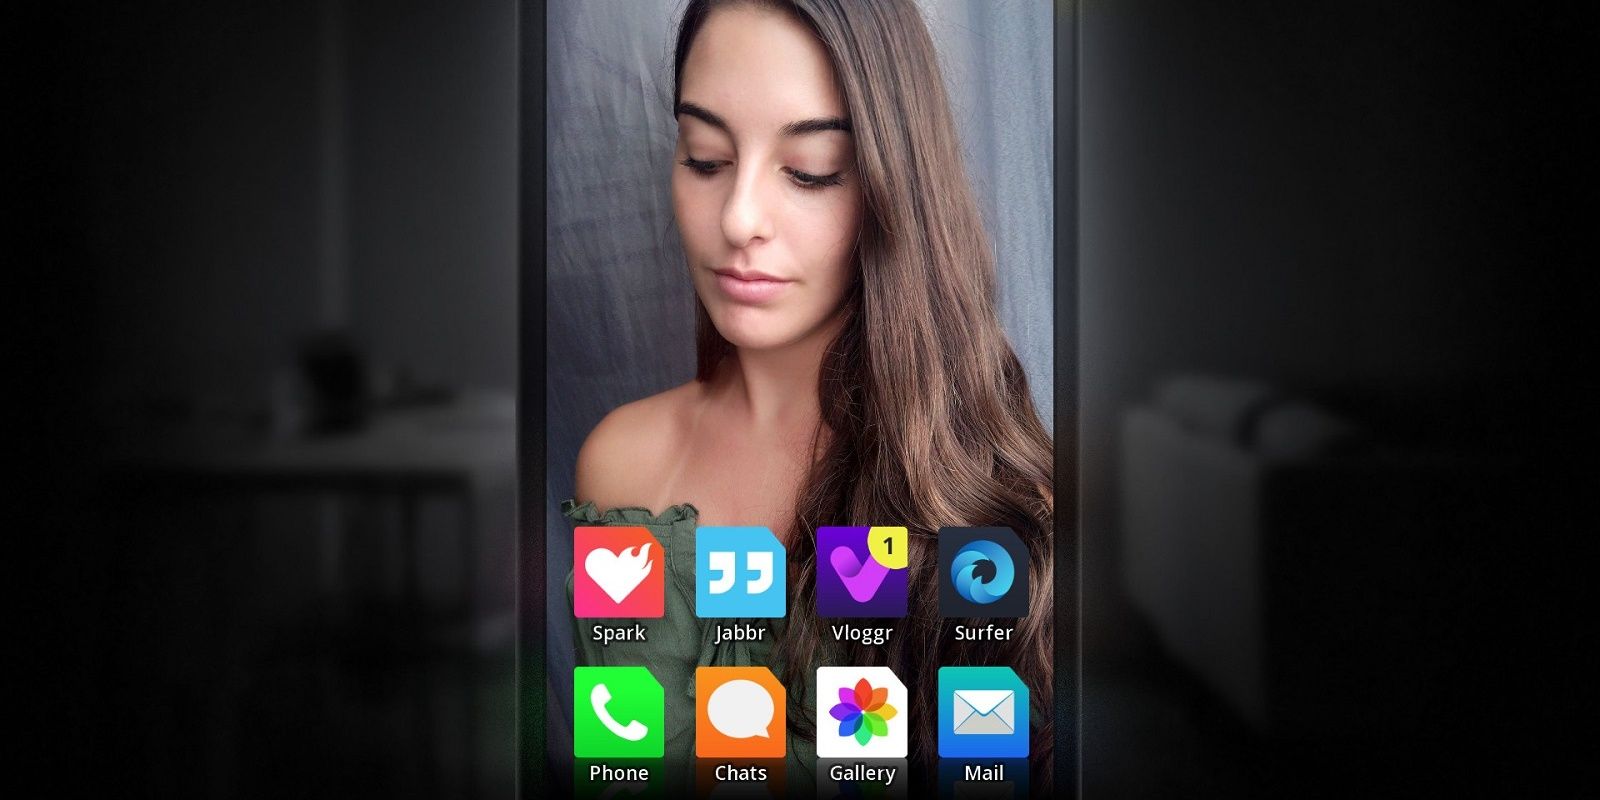 Simulacra - Anna's Phone Home Screen With Her Face As The Background